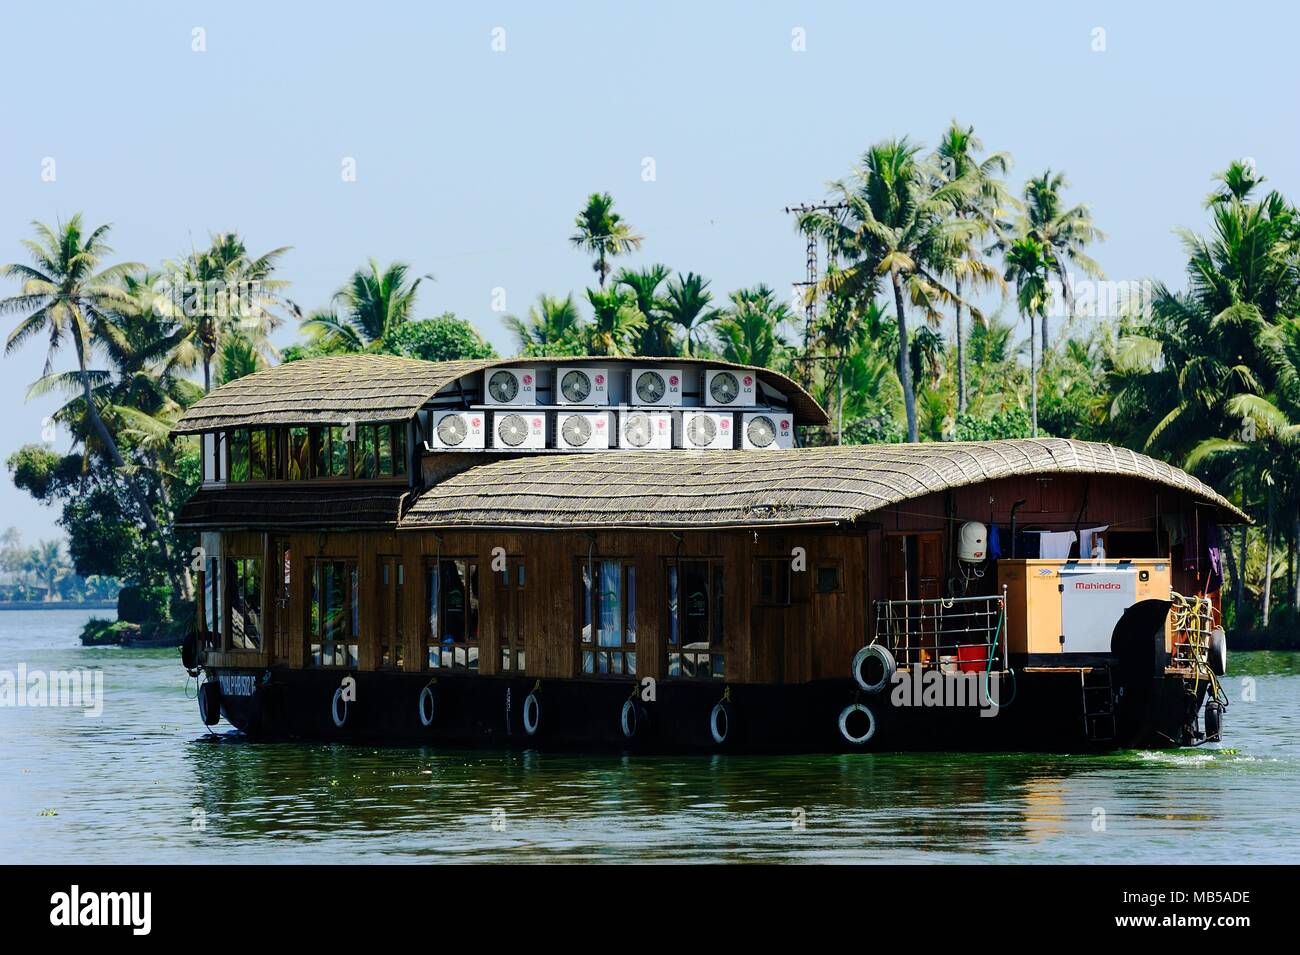 Cochin, India - January 2017:Tourists on a river boat on the backwaters of Kochin Stock Photo